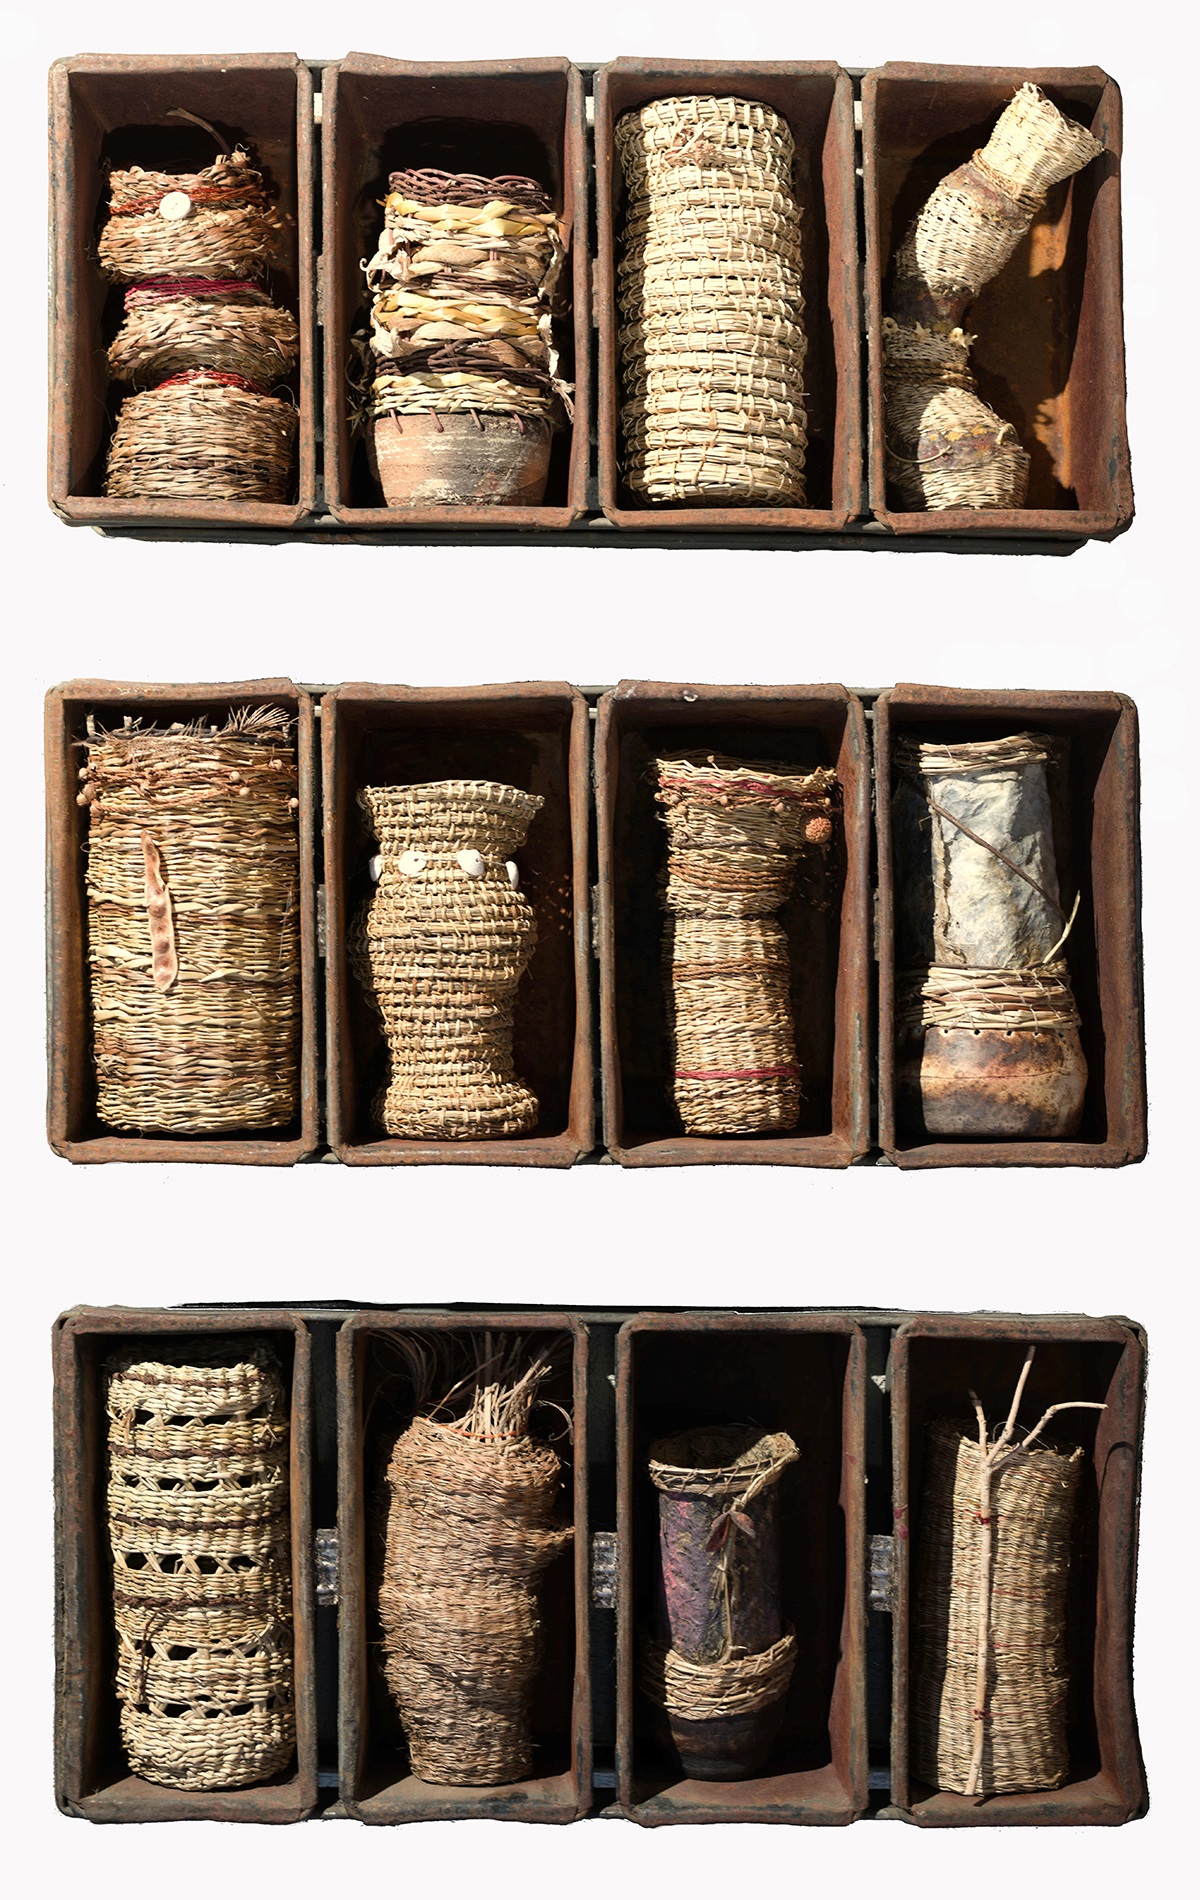 Ann Evers Contained and Baked in the Desert Bakers Tin and Woven Vessels.jpg